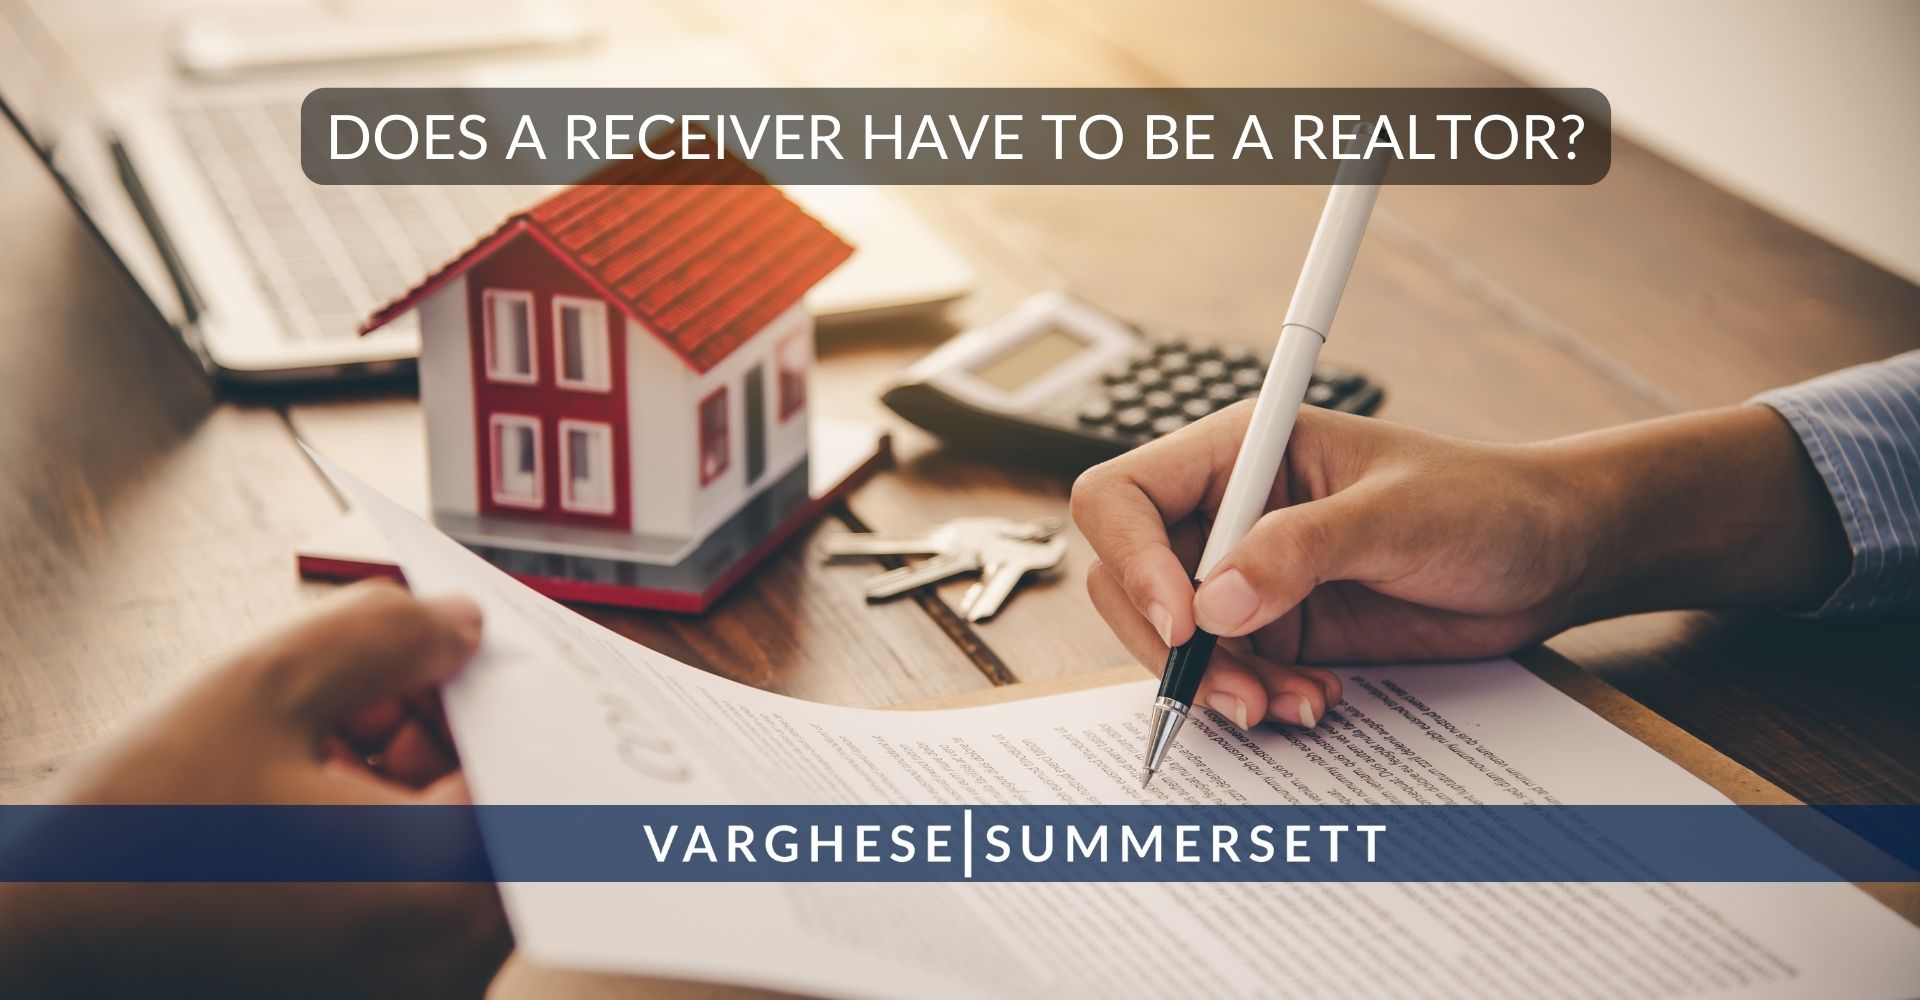 Does a receiver have to be a realtor?